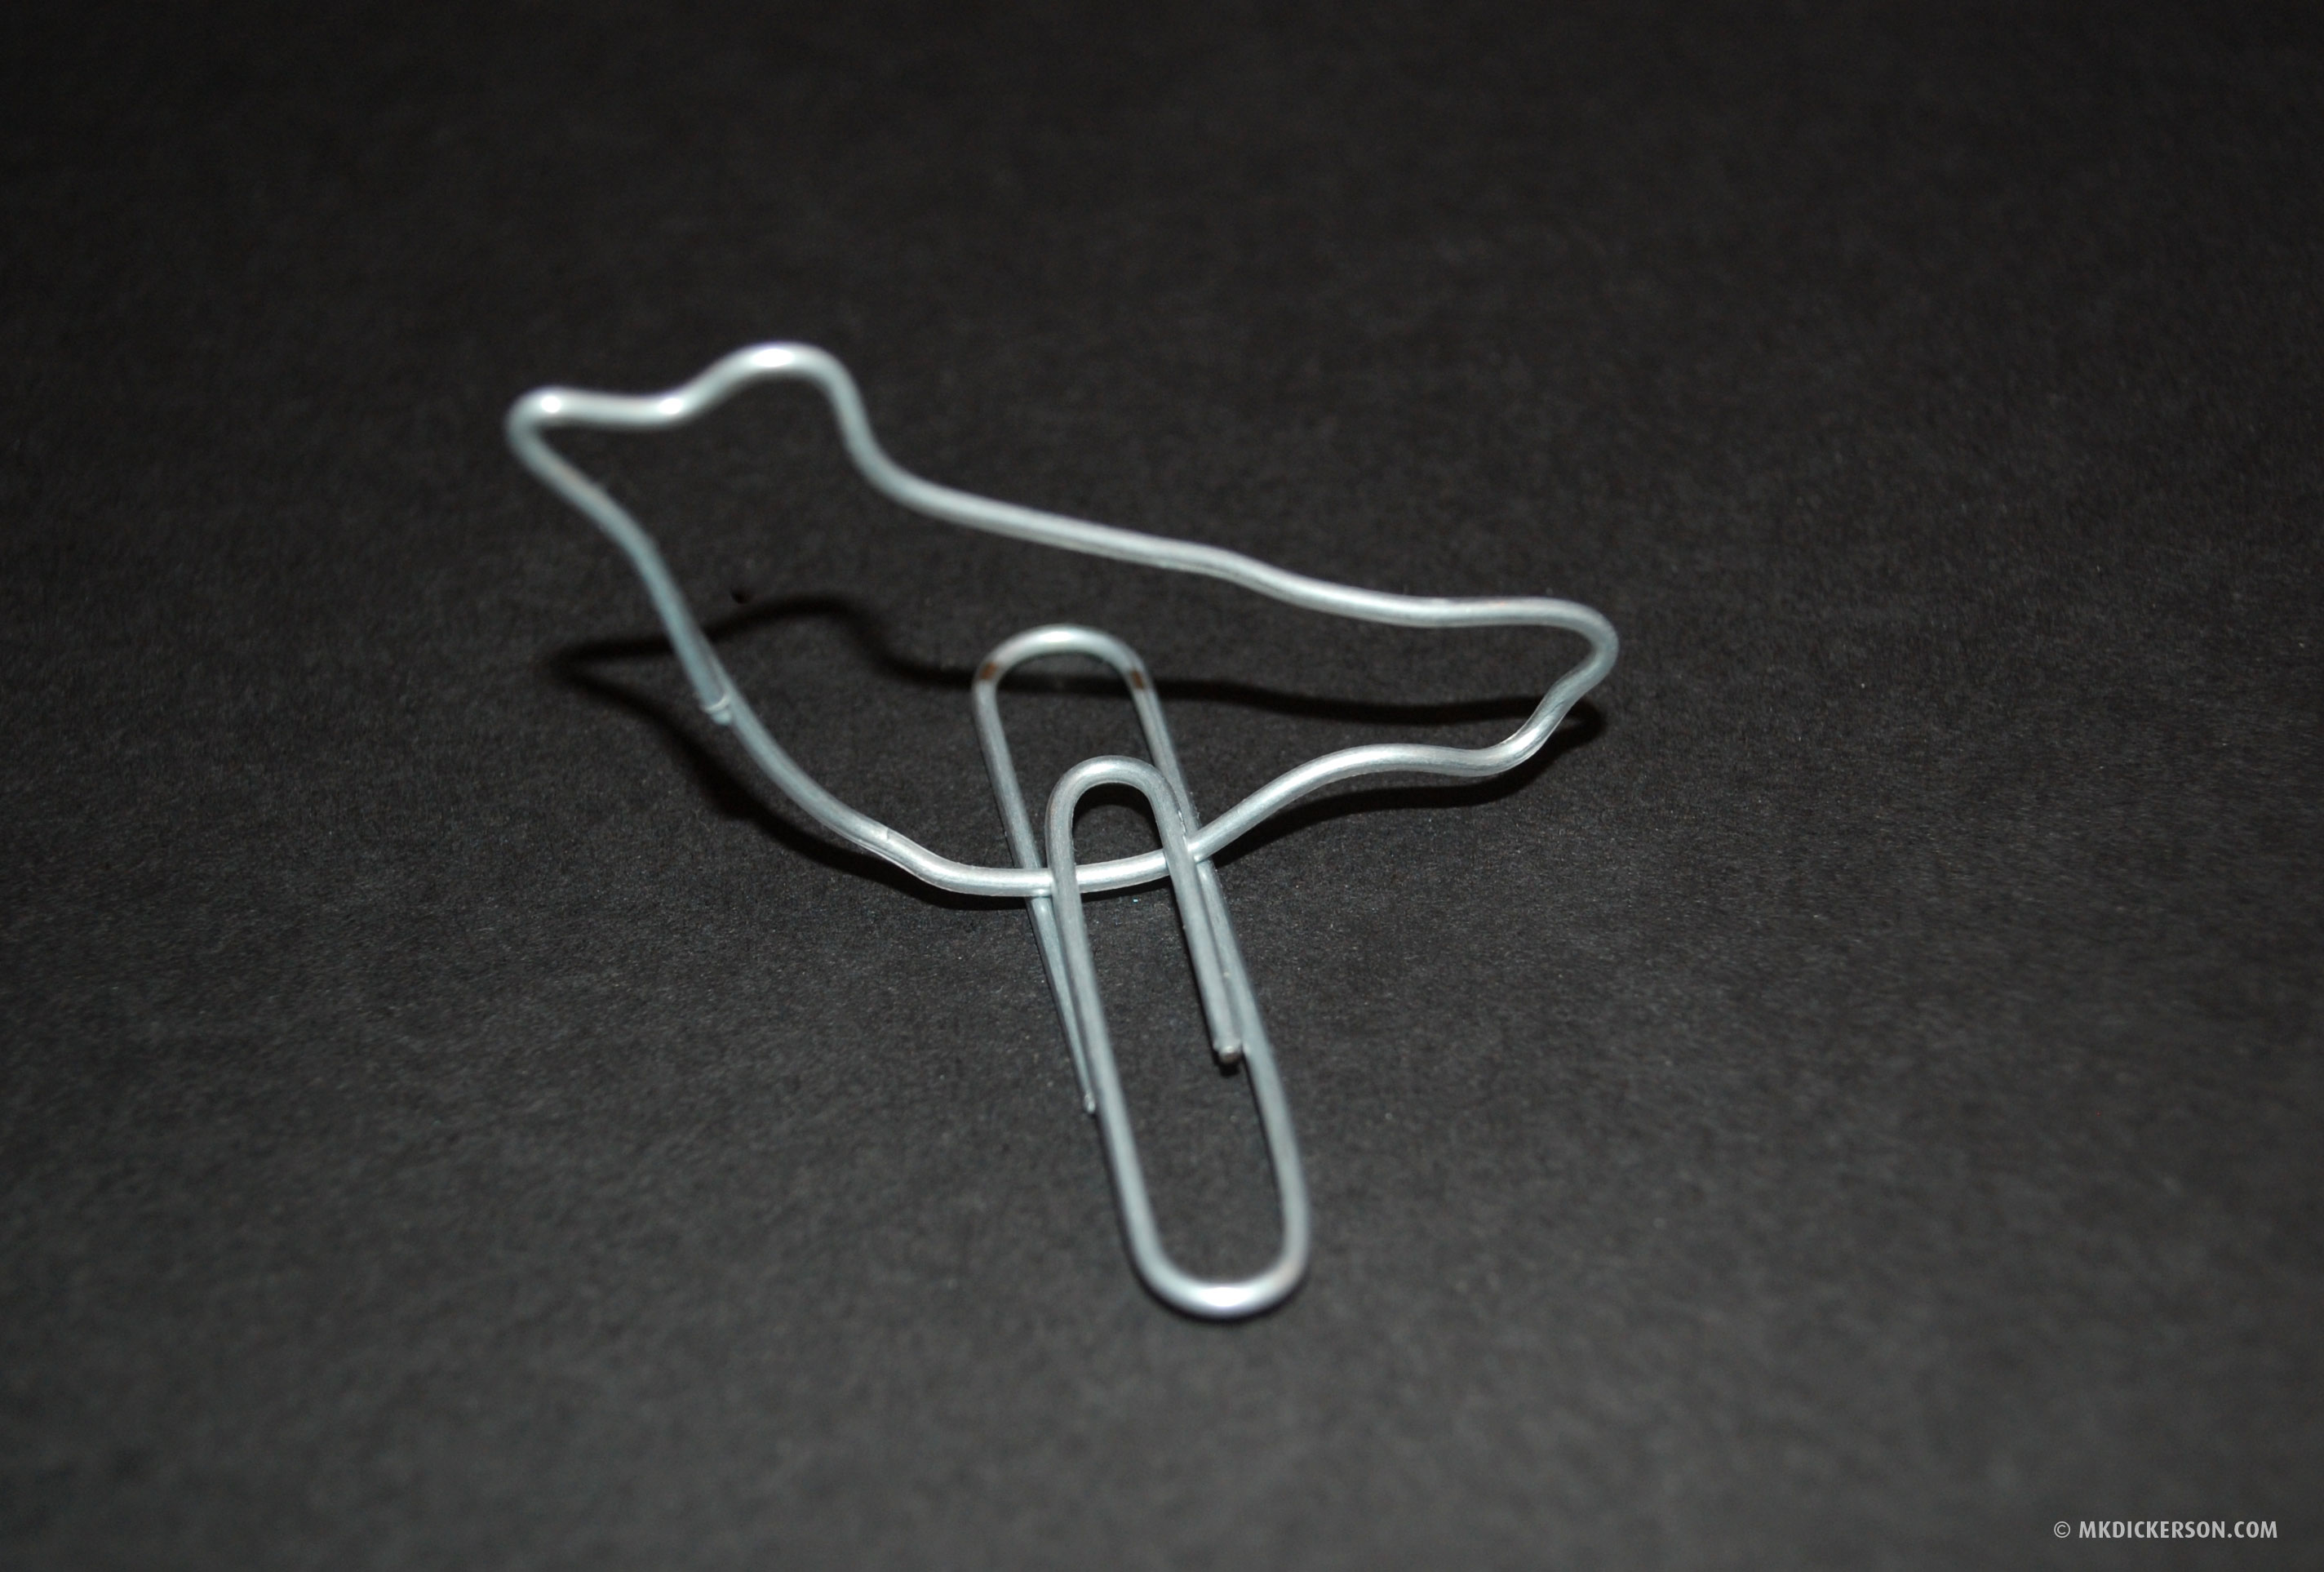 paper clip sculpture of man with guitar. One of my favorite office tools inspired todayu0026#39;s Bird-A-